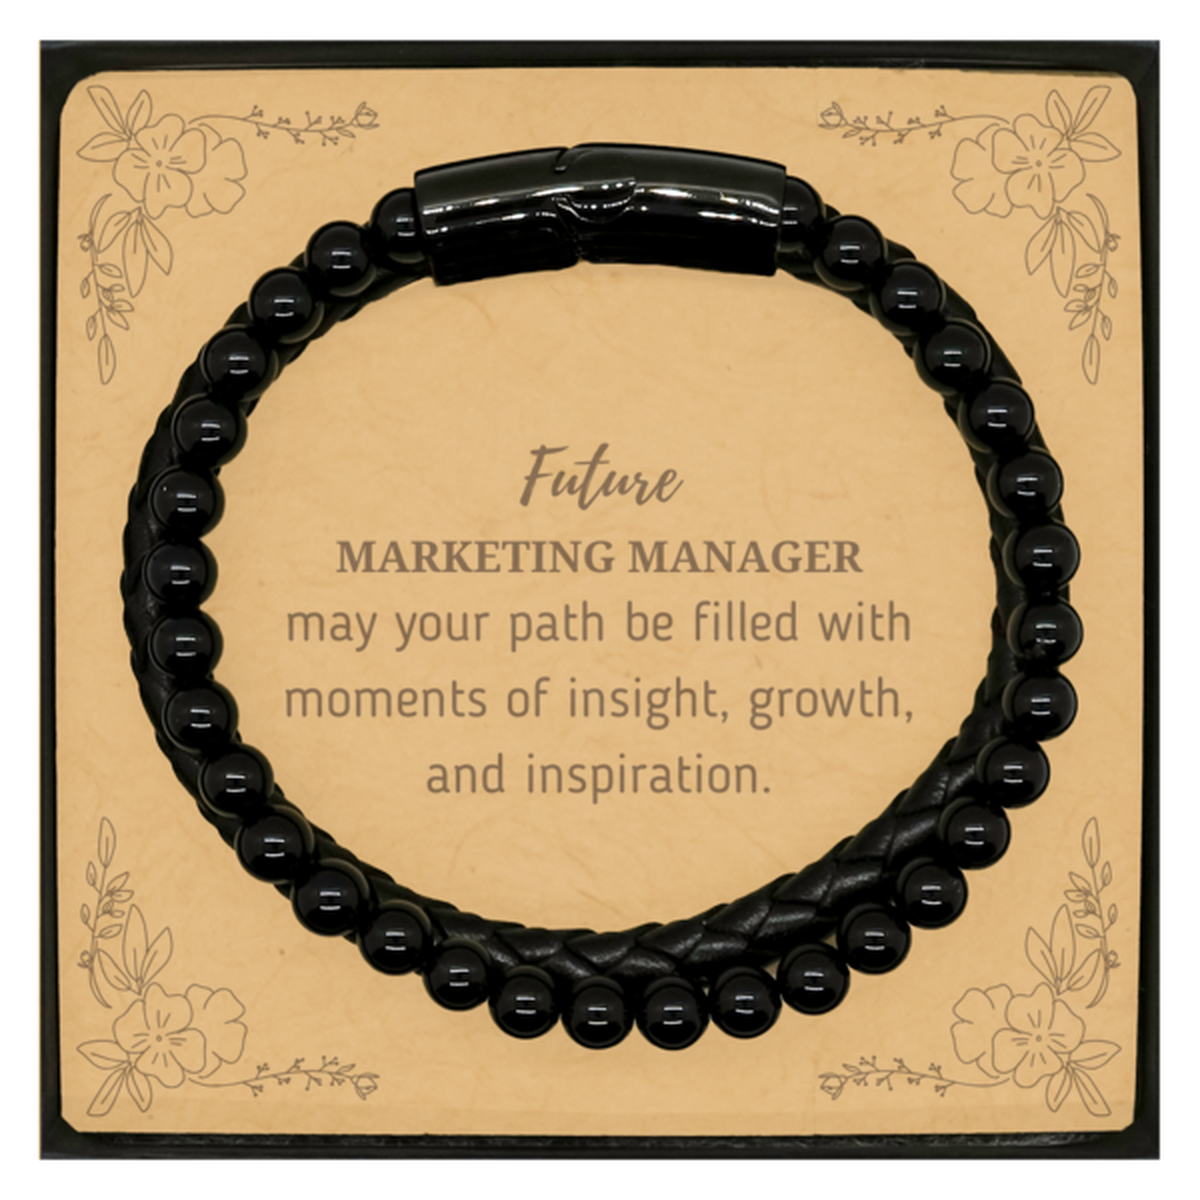 Future Marketing Manager Gifts, May your path be filled with moments of insight, Graduation Gifts for New Marketing Manager, Christmas Unique Stone Leather Bracelets For Men, Women, Friends